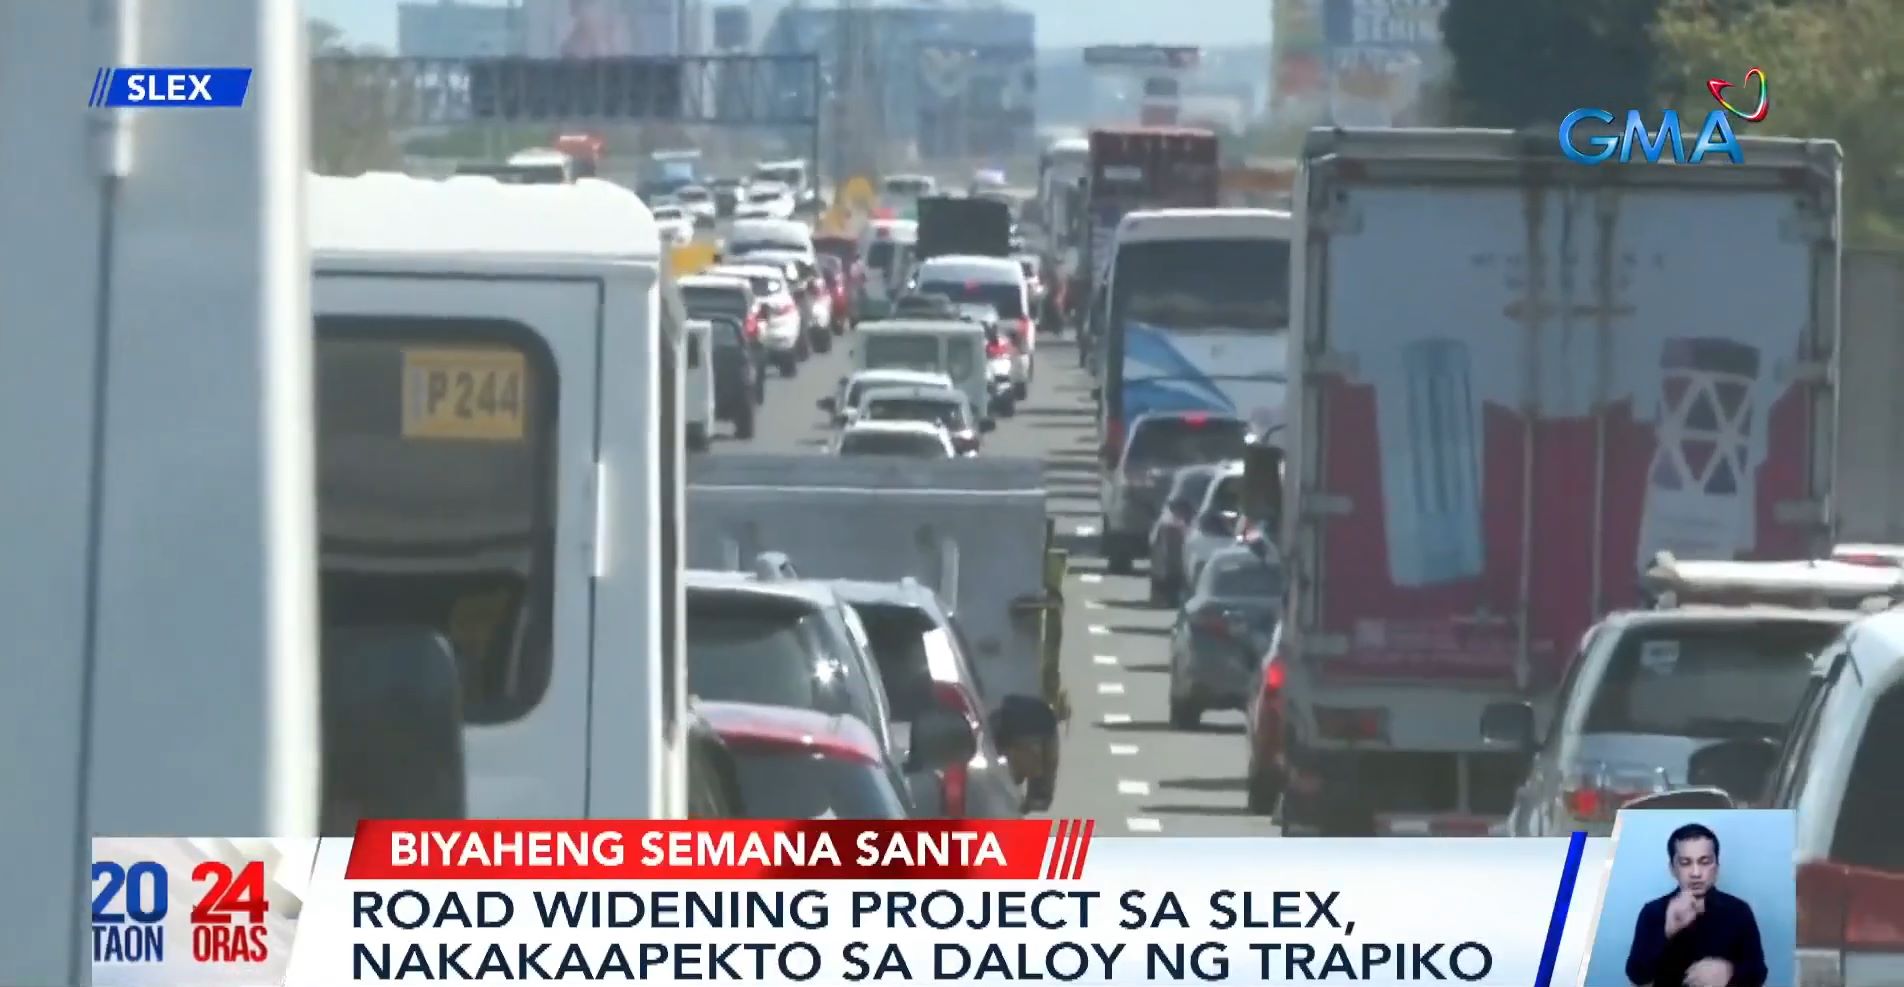 road widening activities slow traffic on slex amid holy week rush